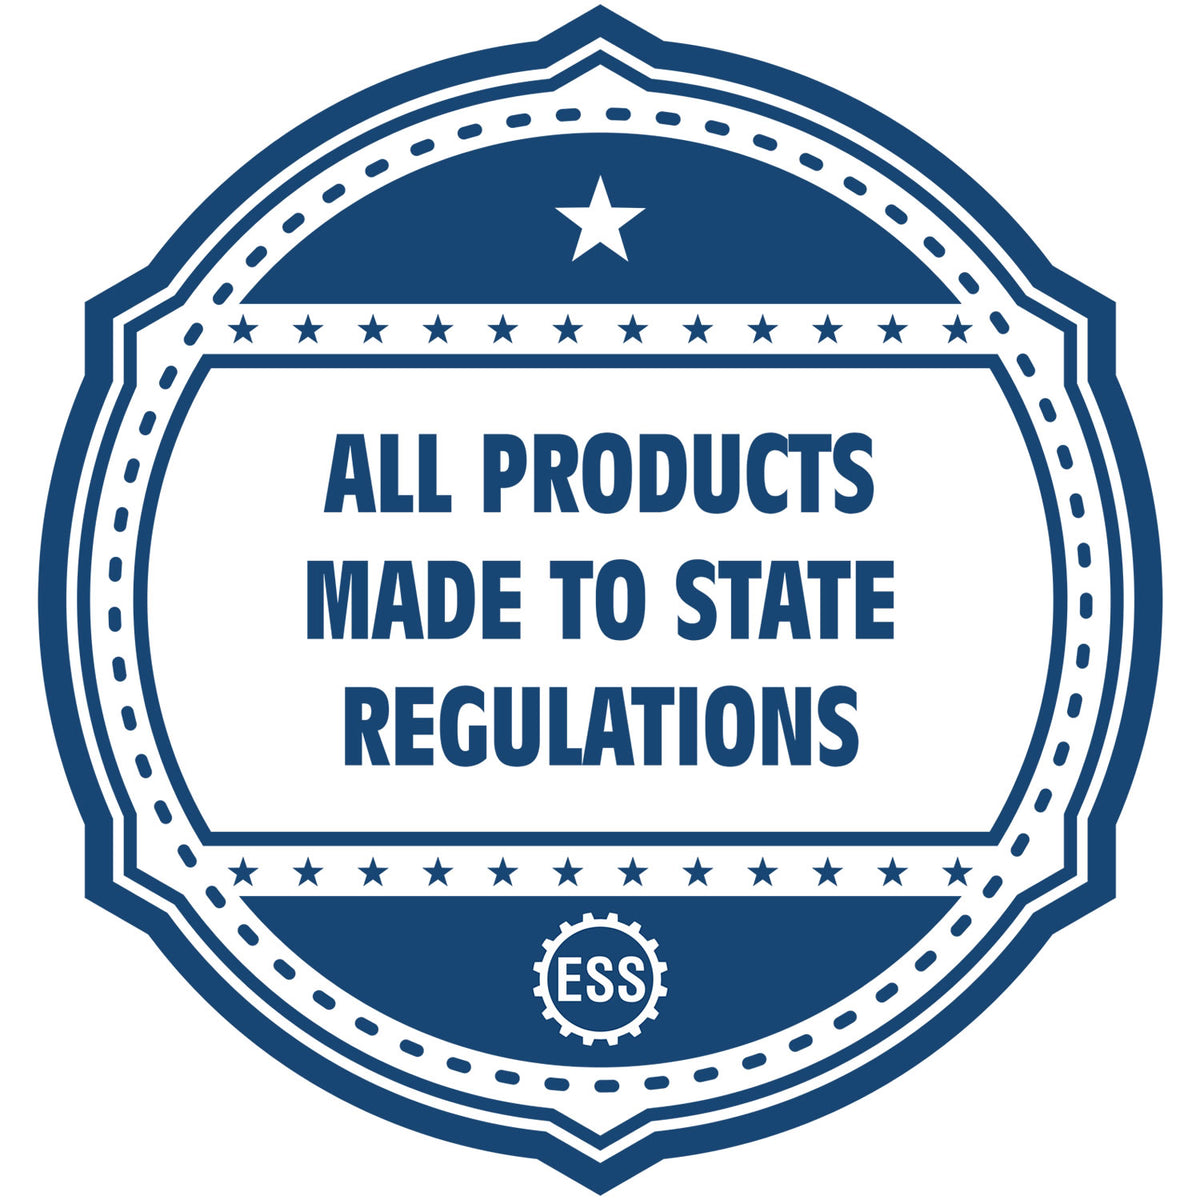 An icon or badge element for the Soft Pocket District of Columbia Landscape Architect Embosser showing that this product is made in compliance with state regulations.